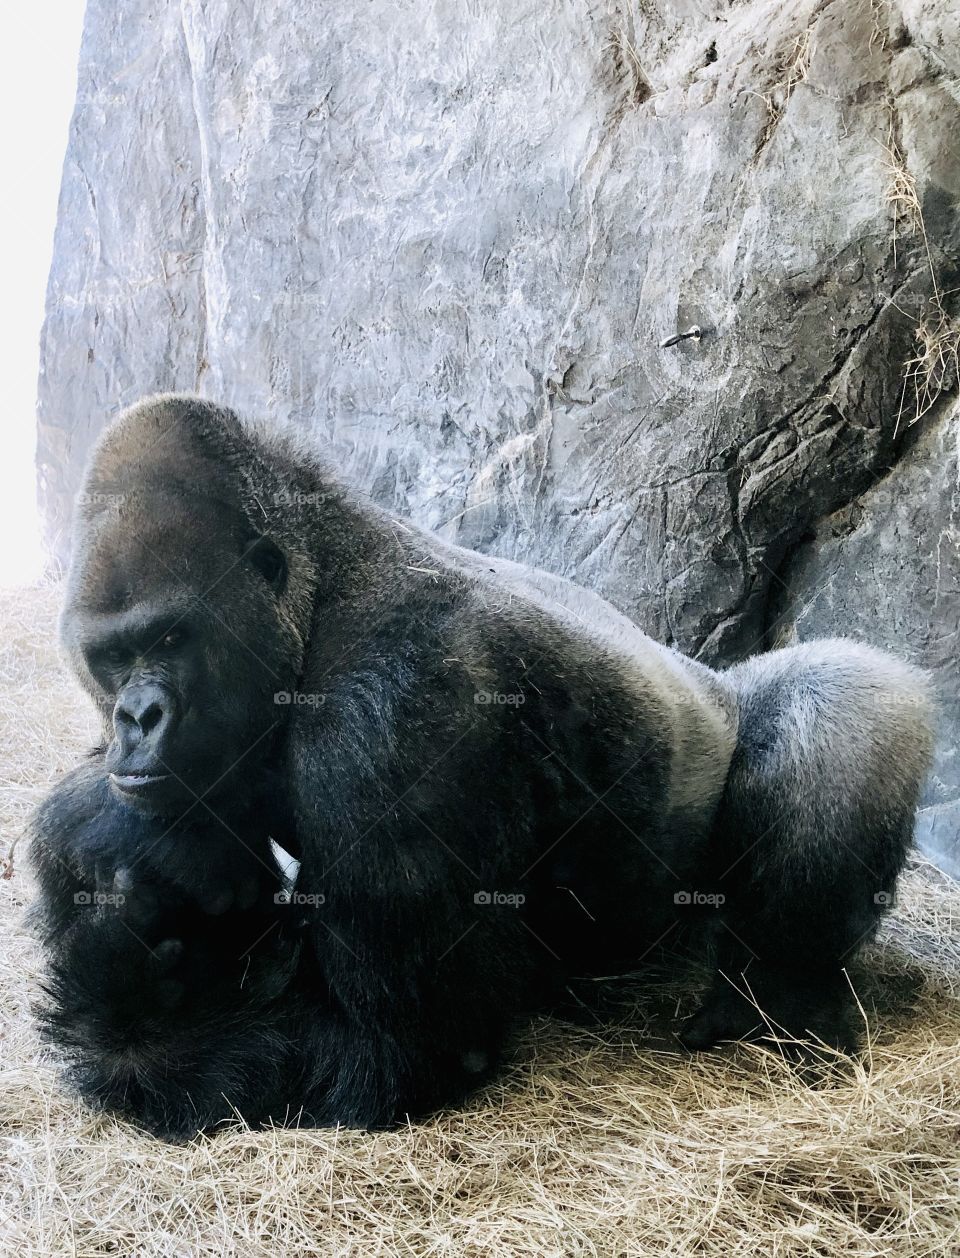 Gorilla in deep thought 